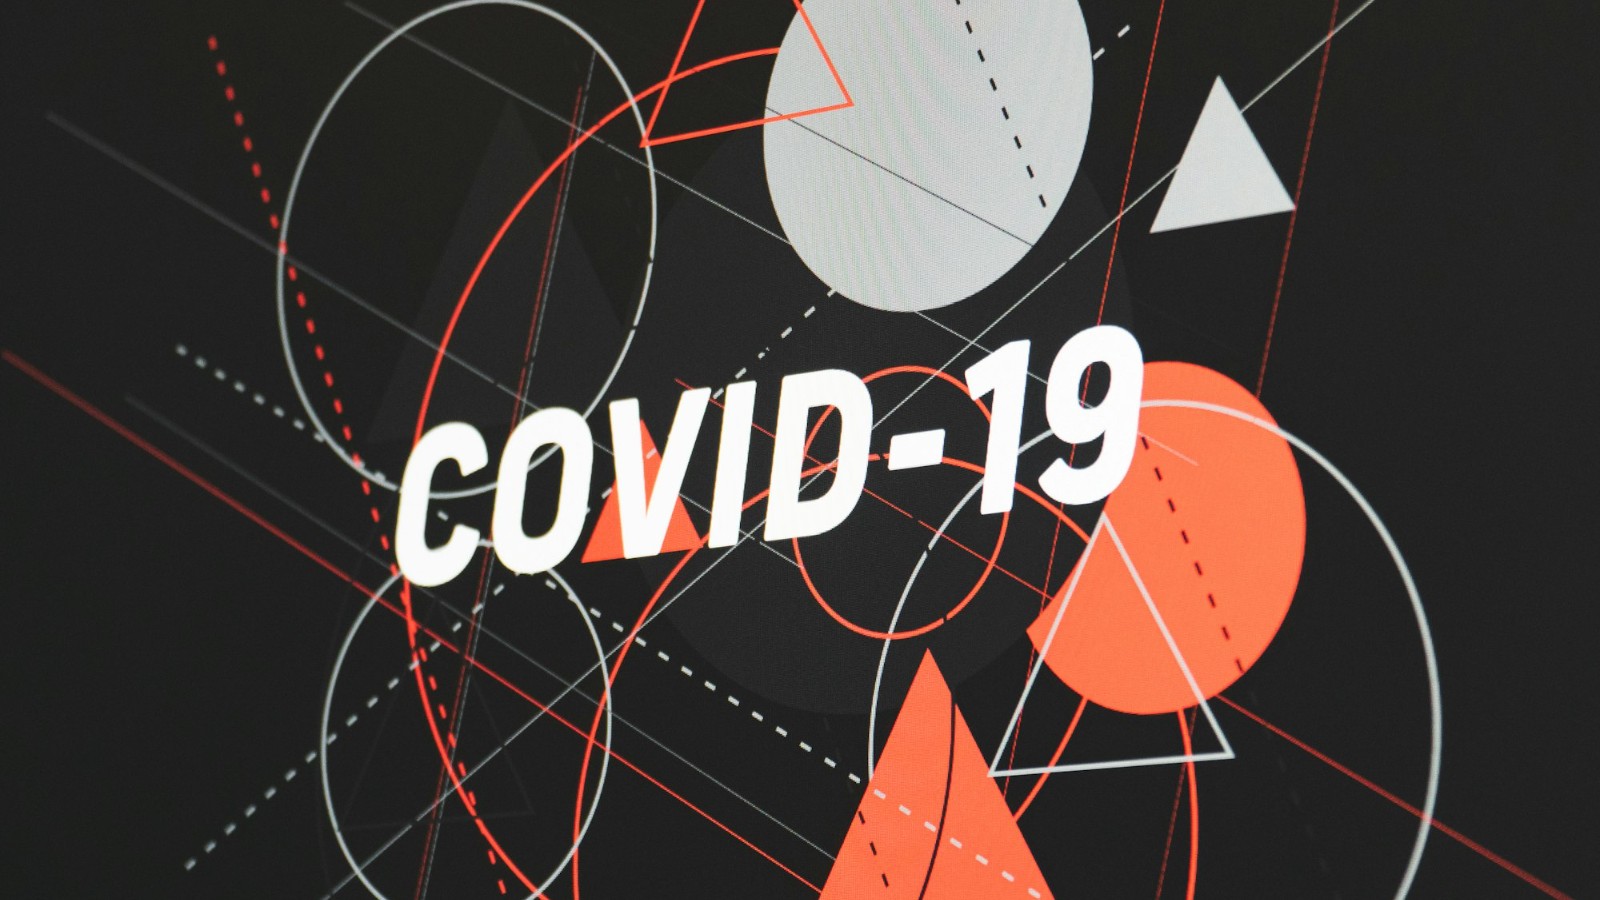 Featured image for “COVID-19”